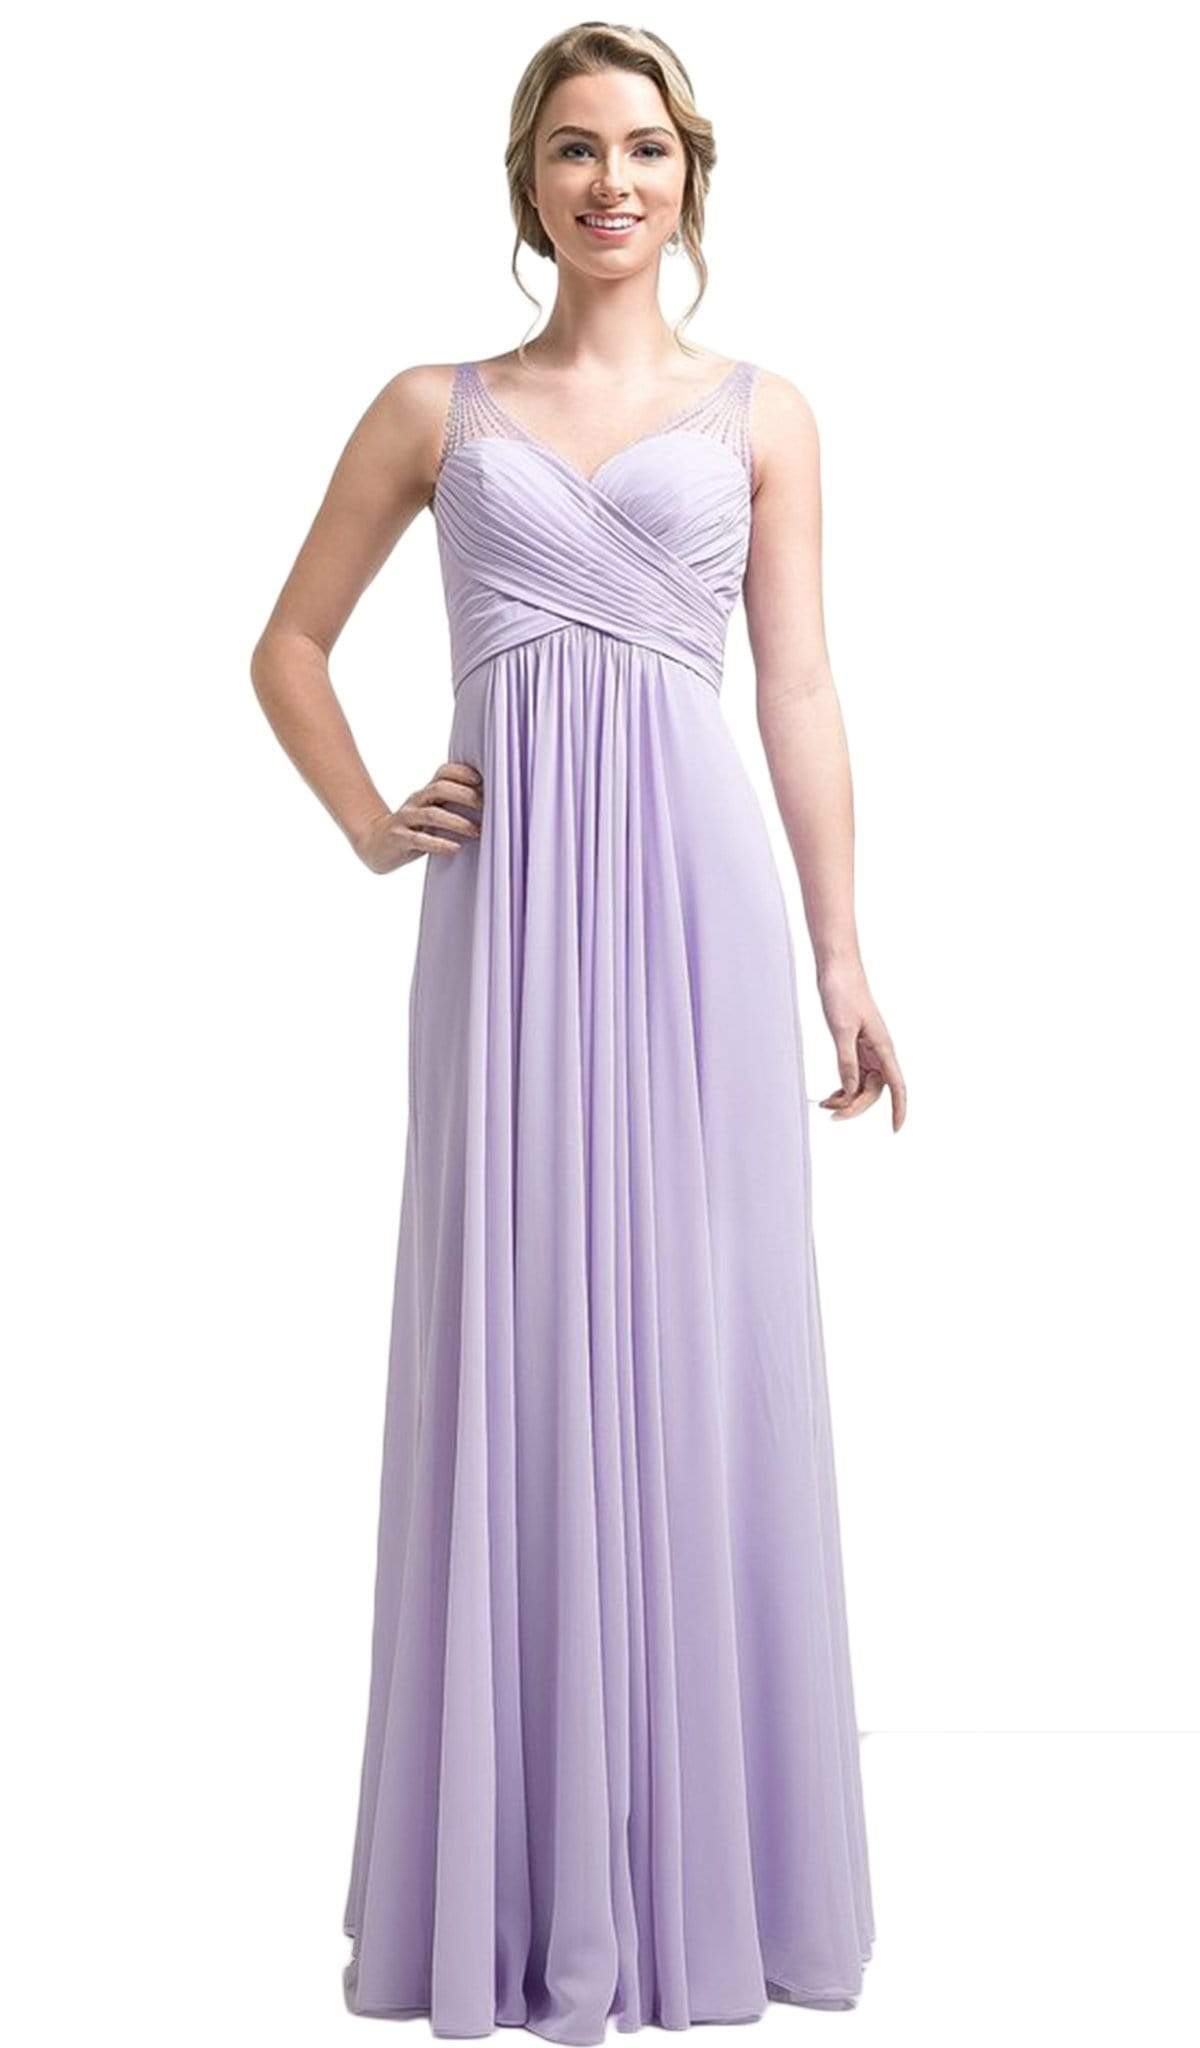 Cinderella Divine - Strapless Crisscrossed Bodice A-Line Long Formal Gown
